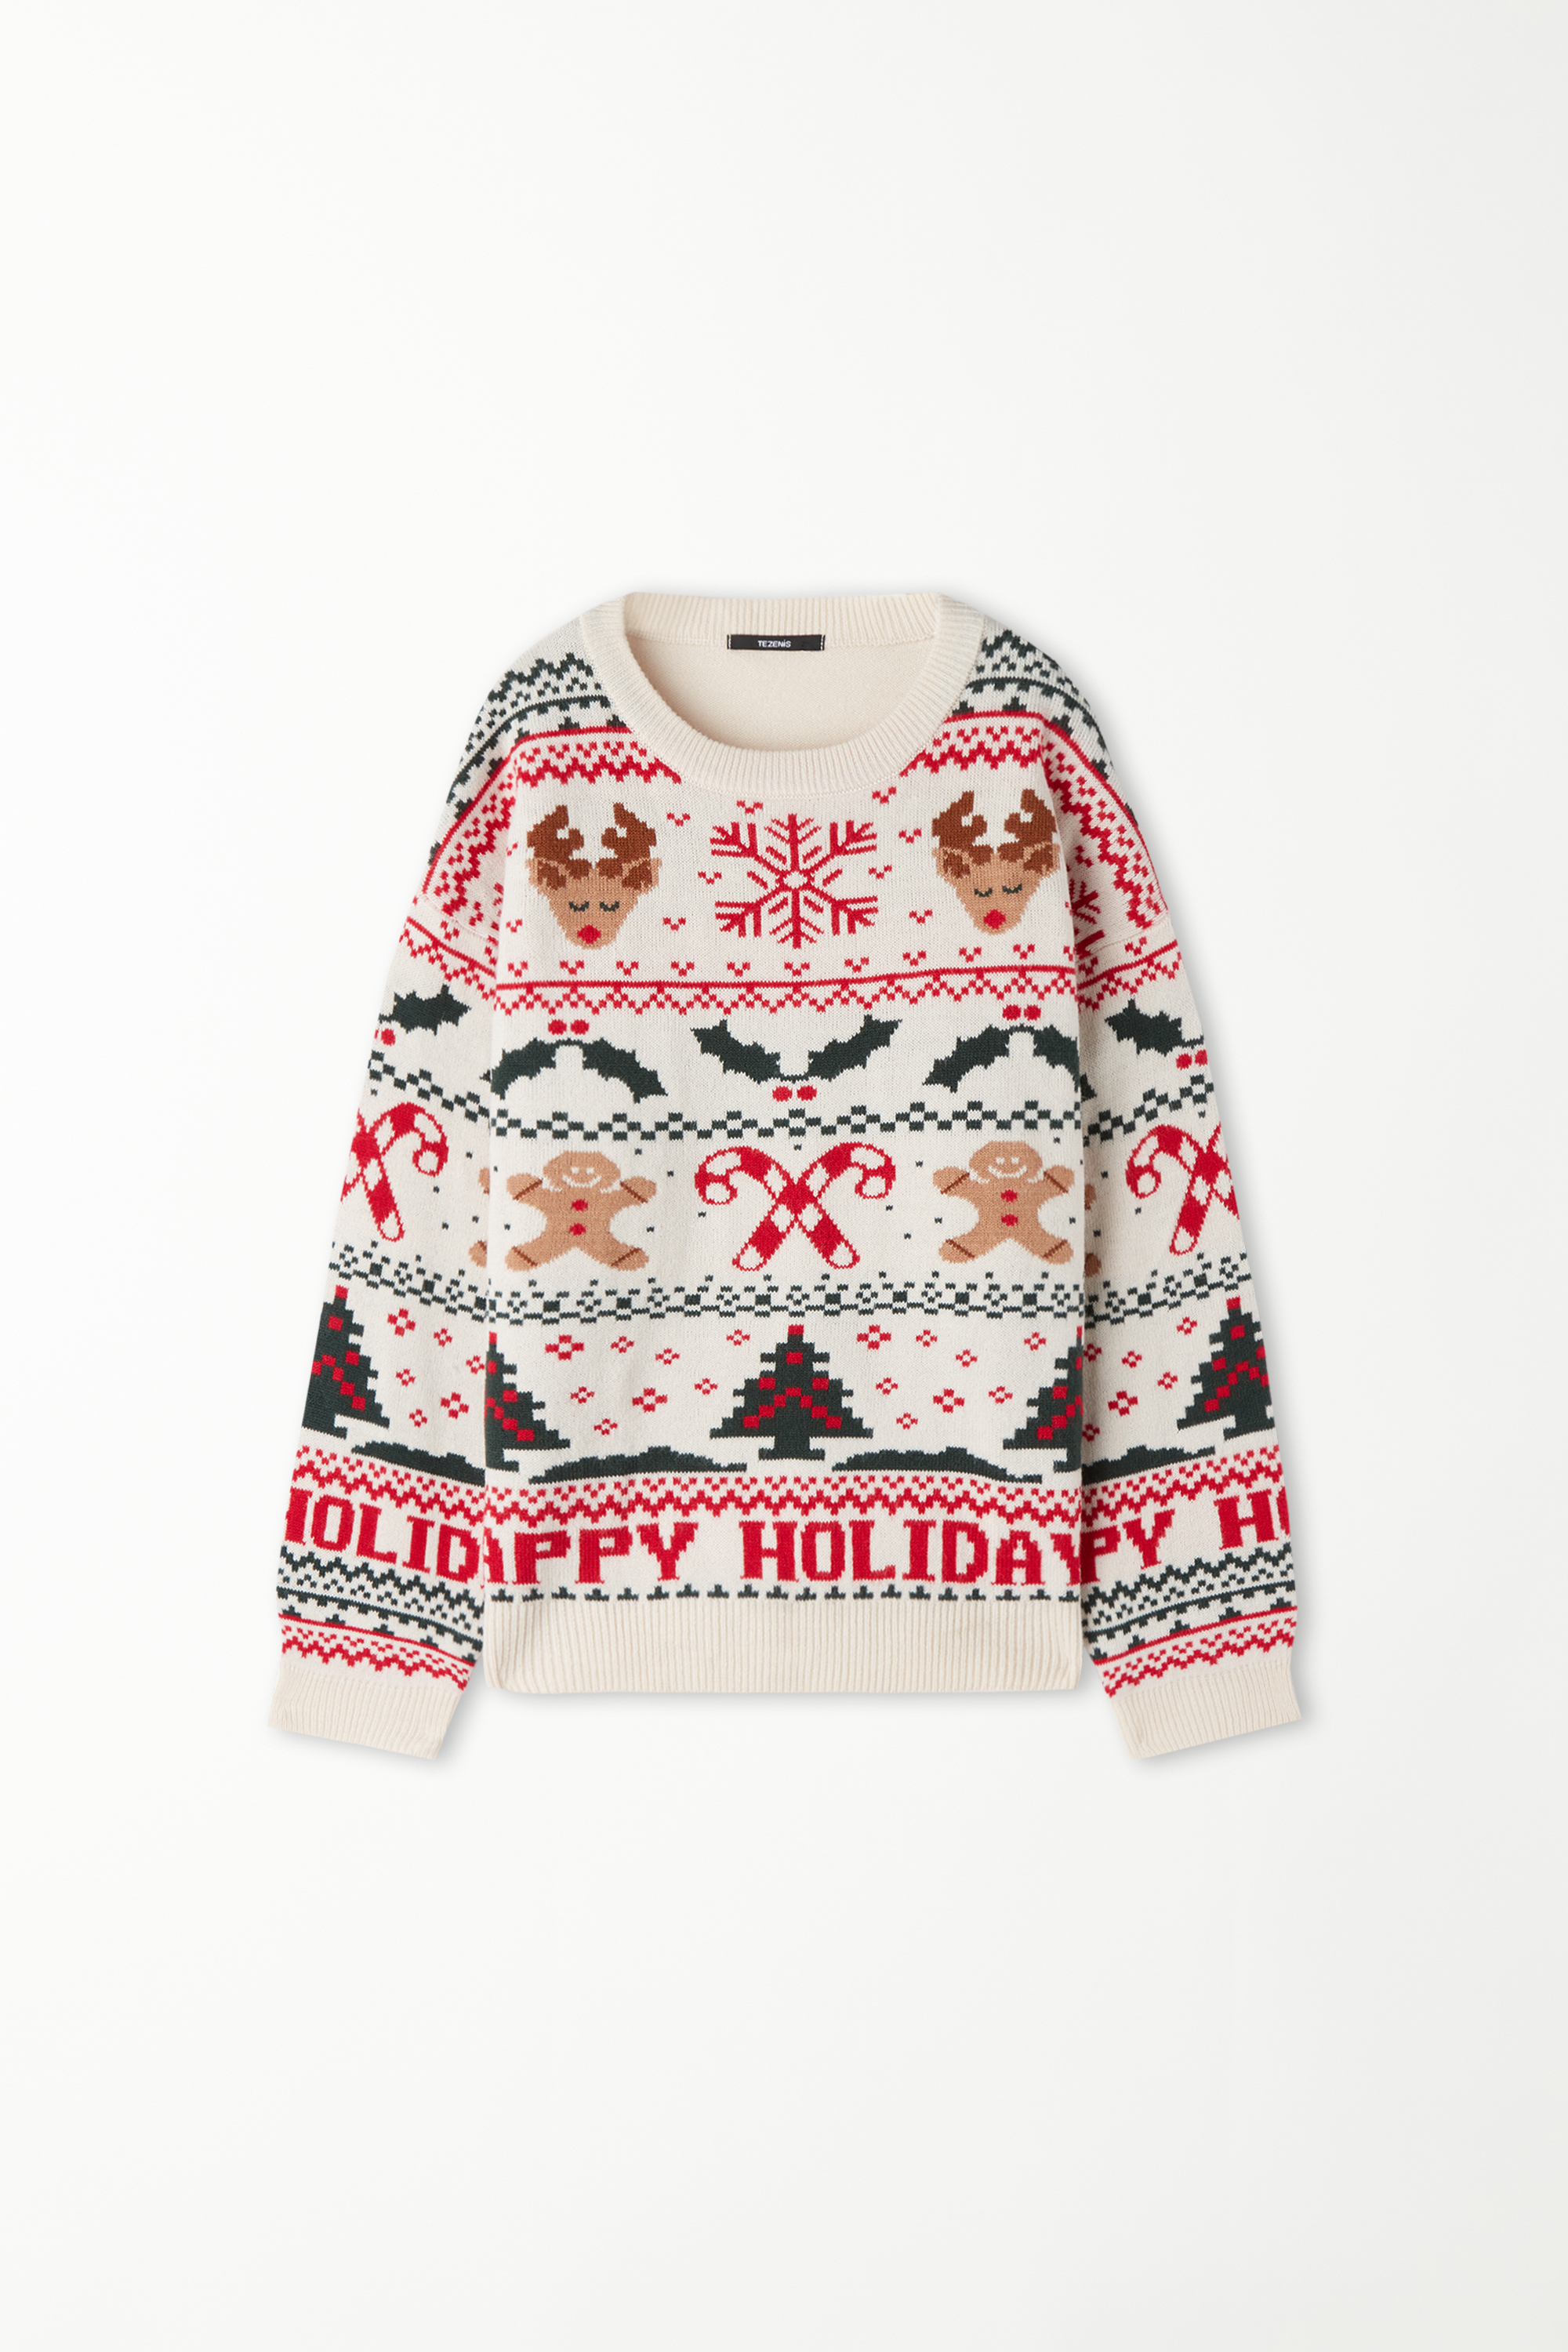 Kids’ Unisex Rounded Neck Sweater with Christmas Print